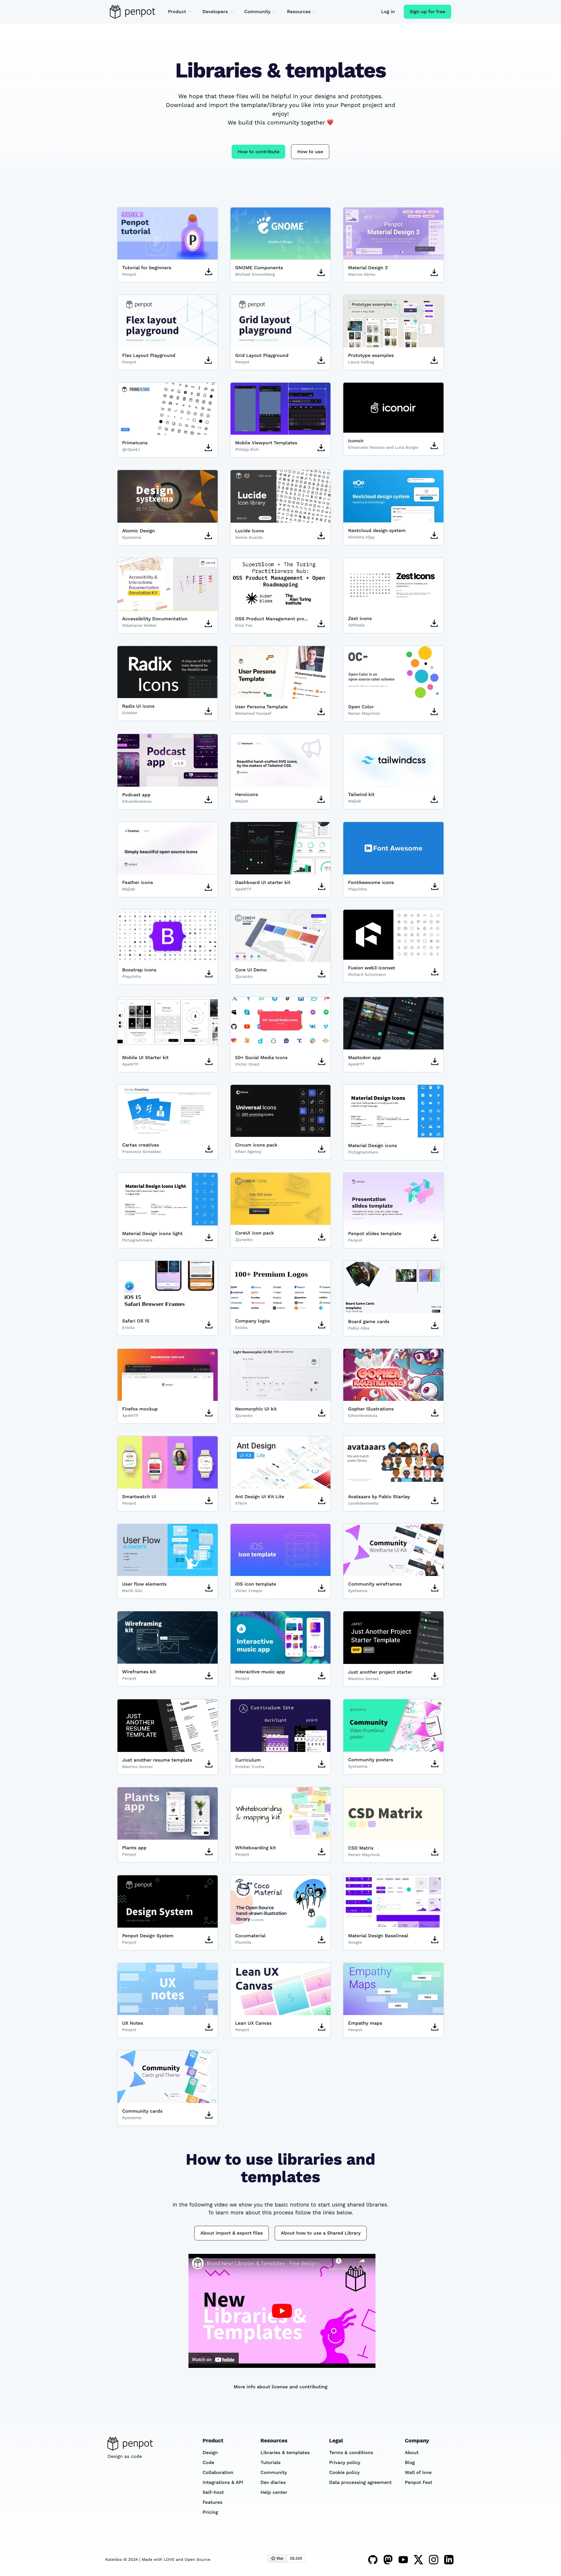 Penpot Landing Page Example: Design and code beautiful products. Together. Penpot is the web-based open-source design tool that bridges the gap between designers and developers.